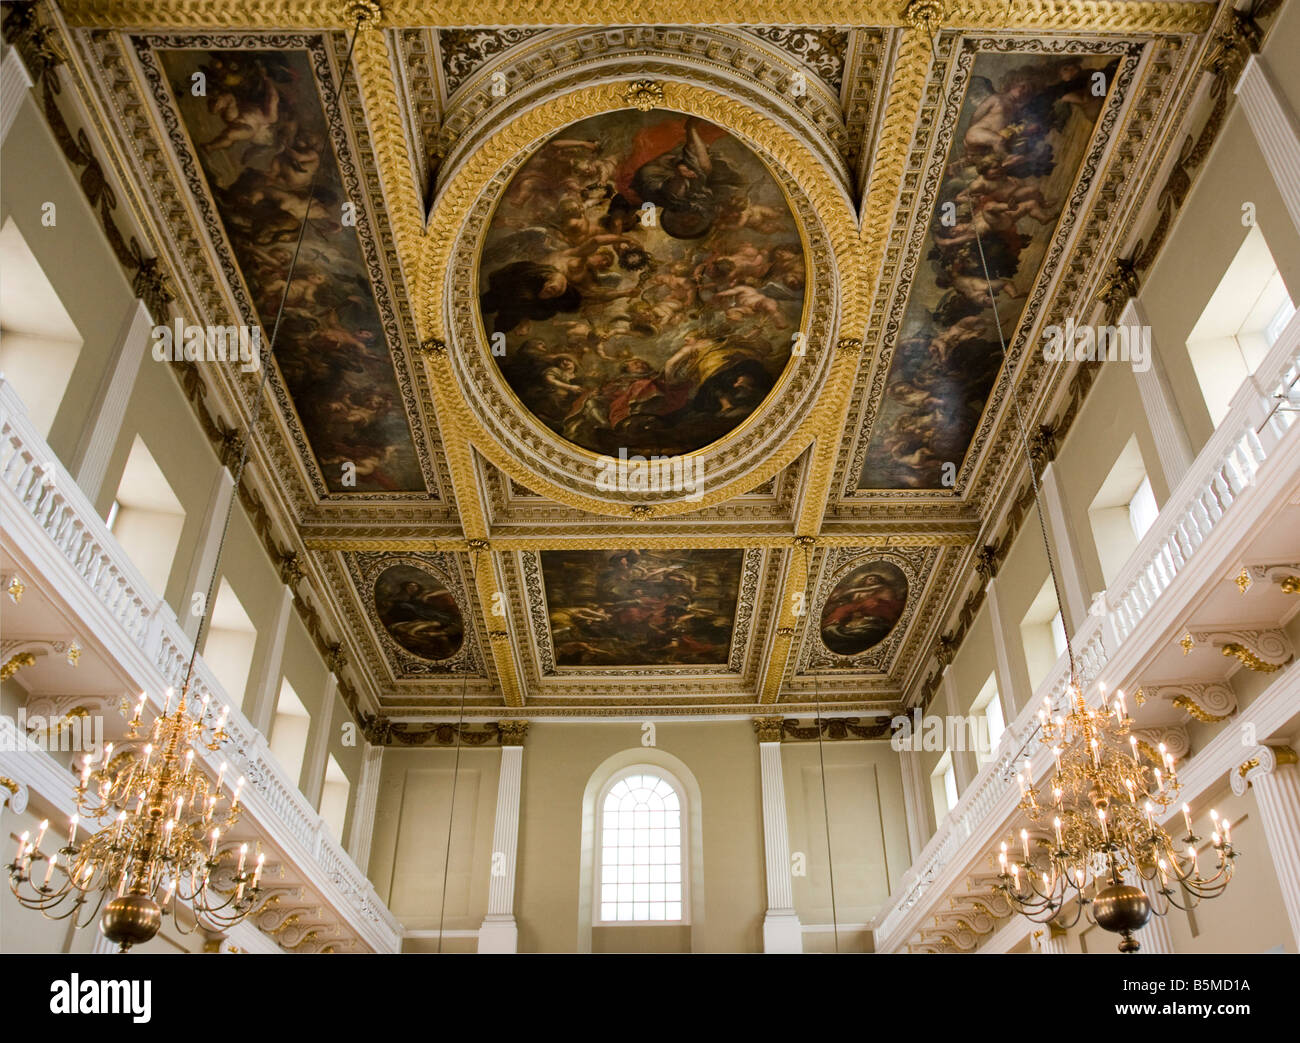 Painted Ceiling The Banqueting House Whitehall London England The